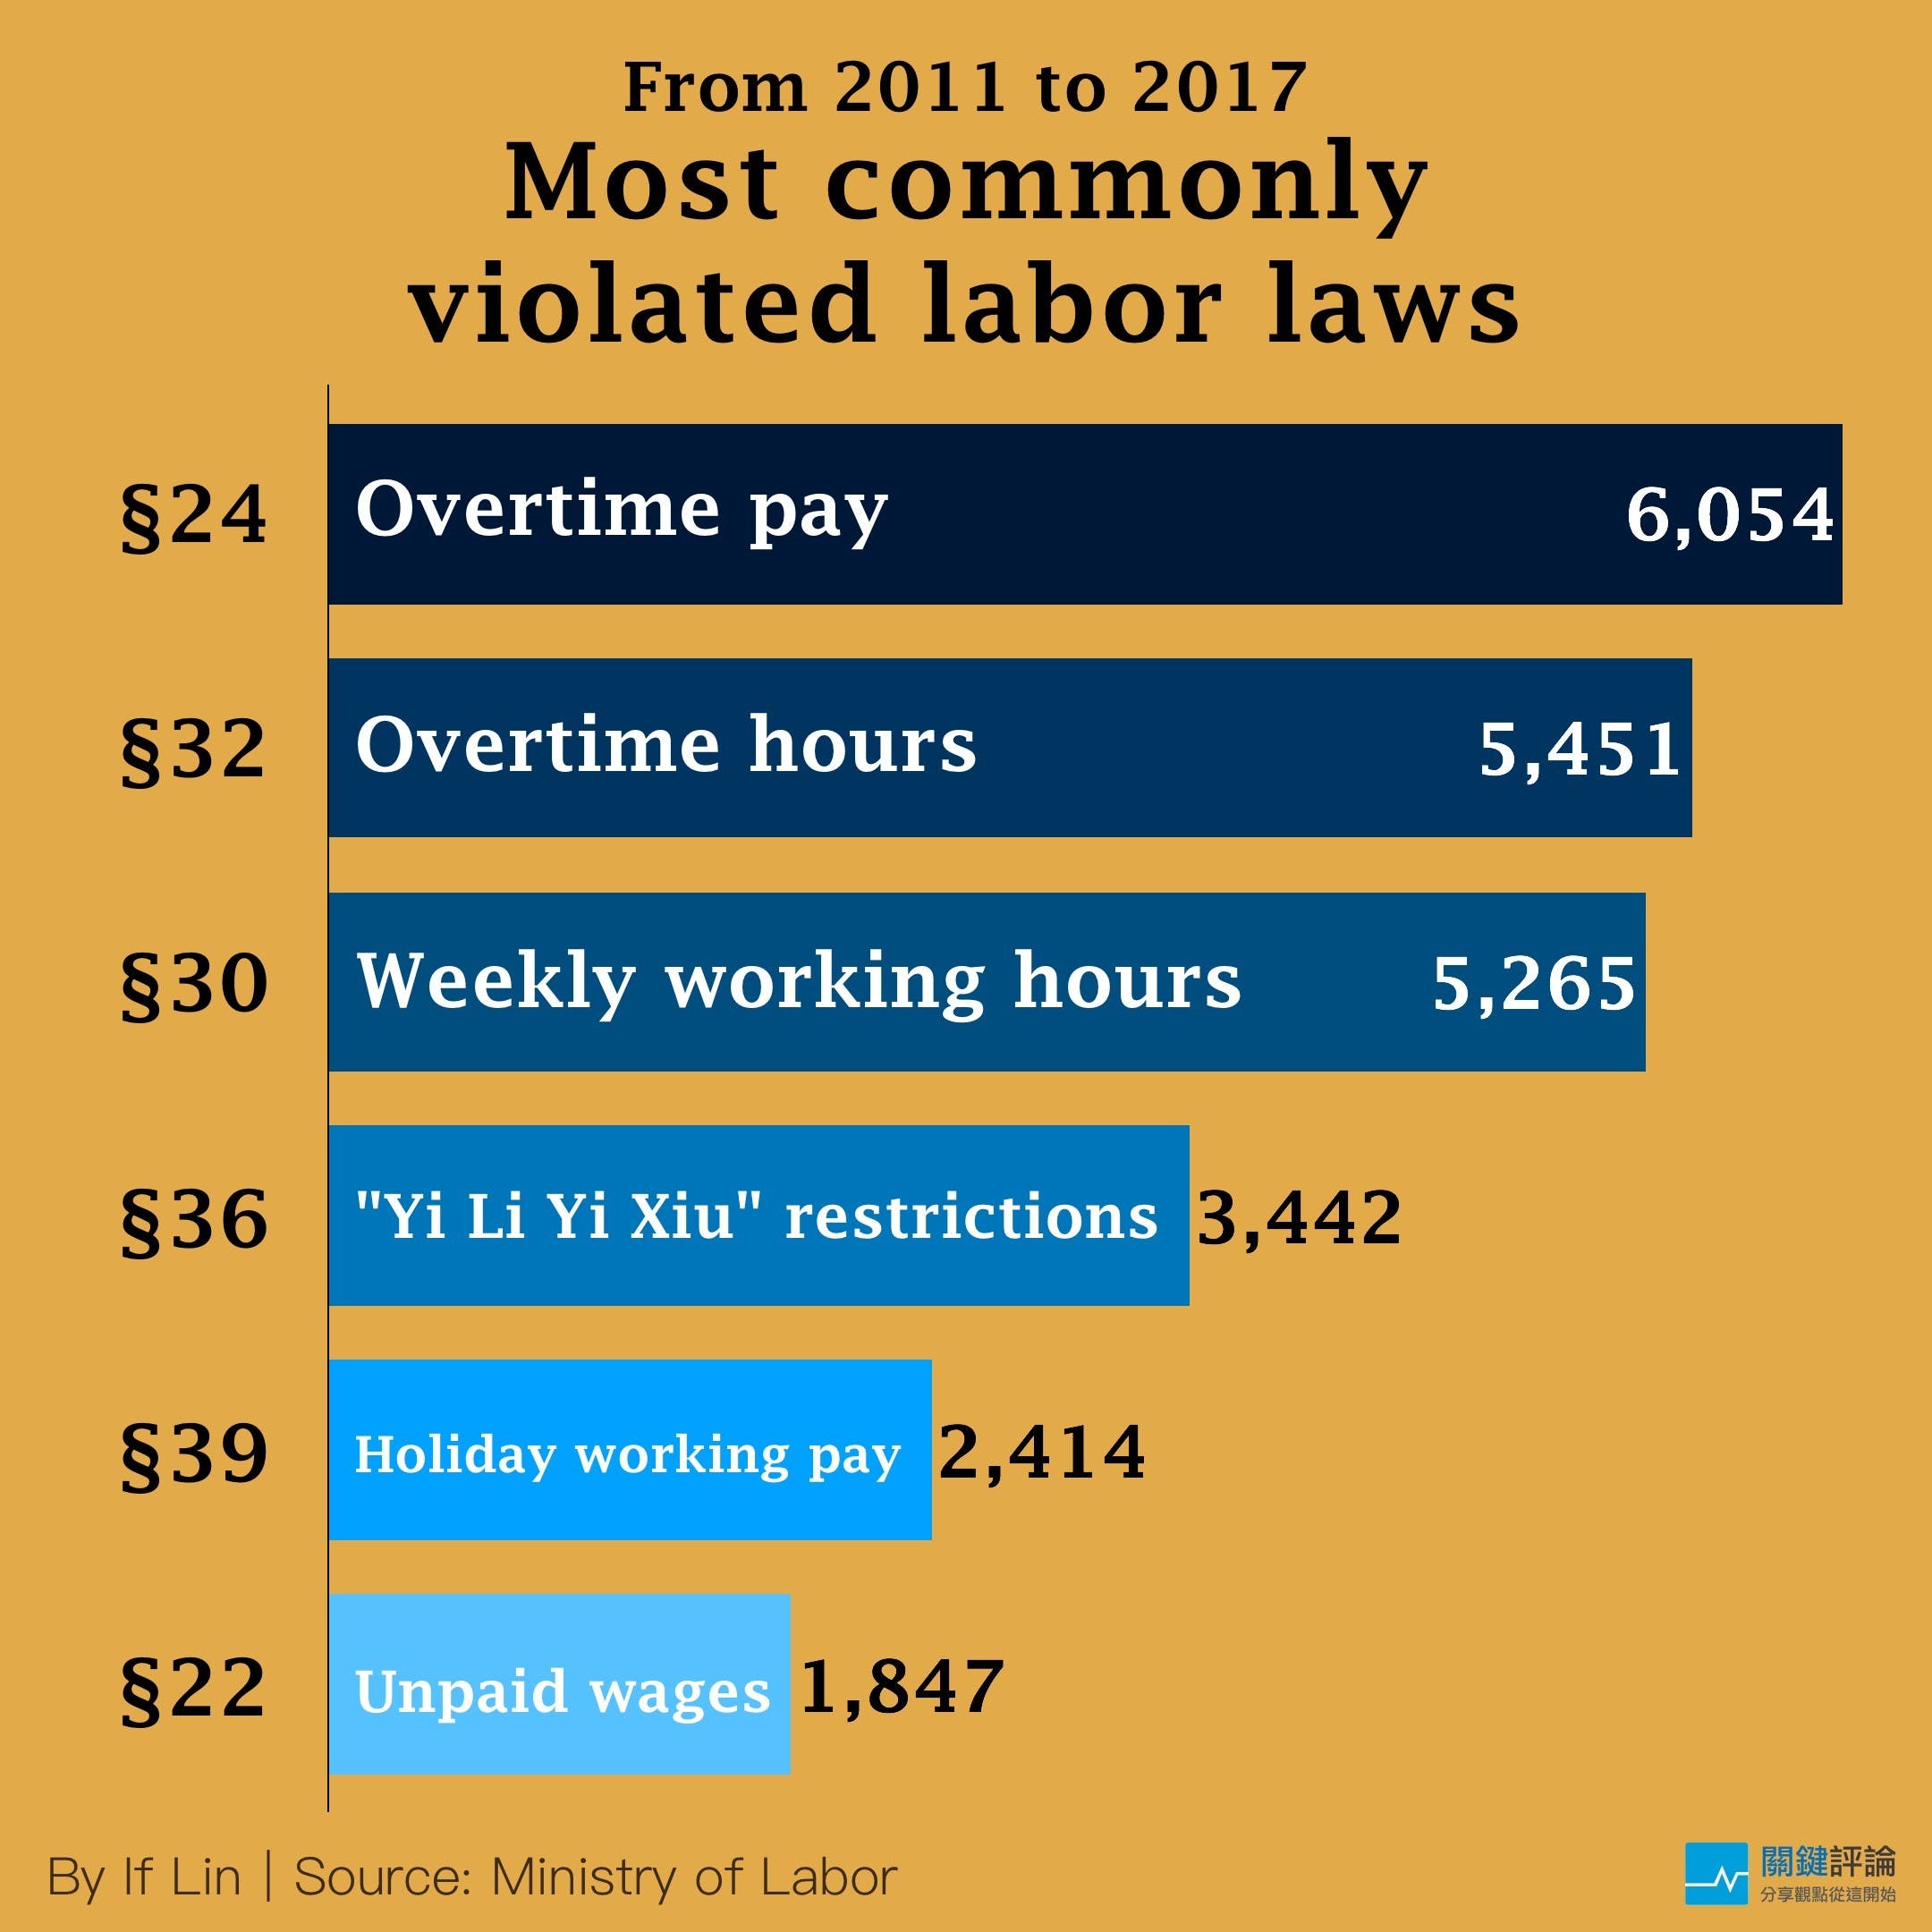 Most commonly violated labor laws